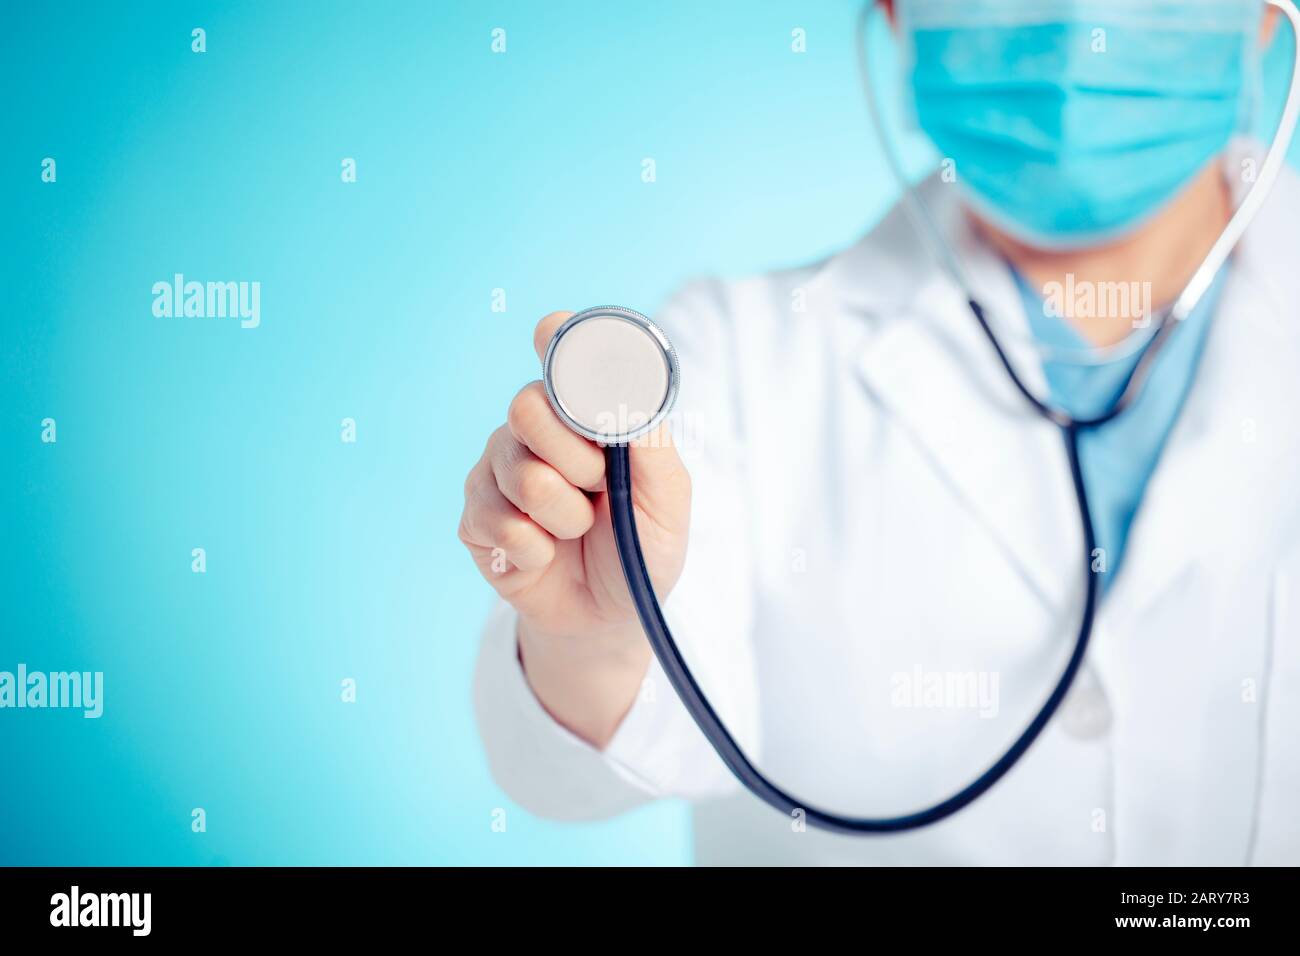 doctor with stethoscope in hand for medical exam concepts Stock Photo